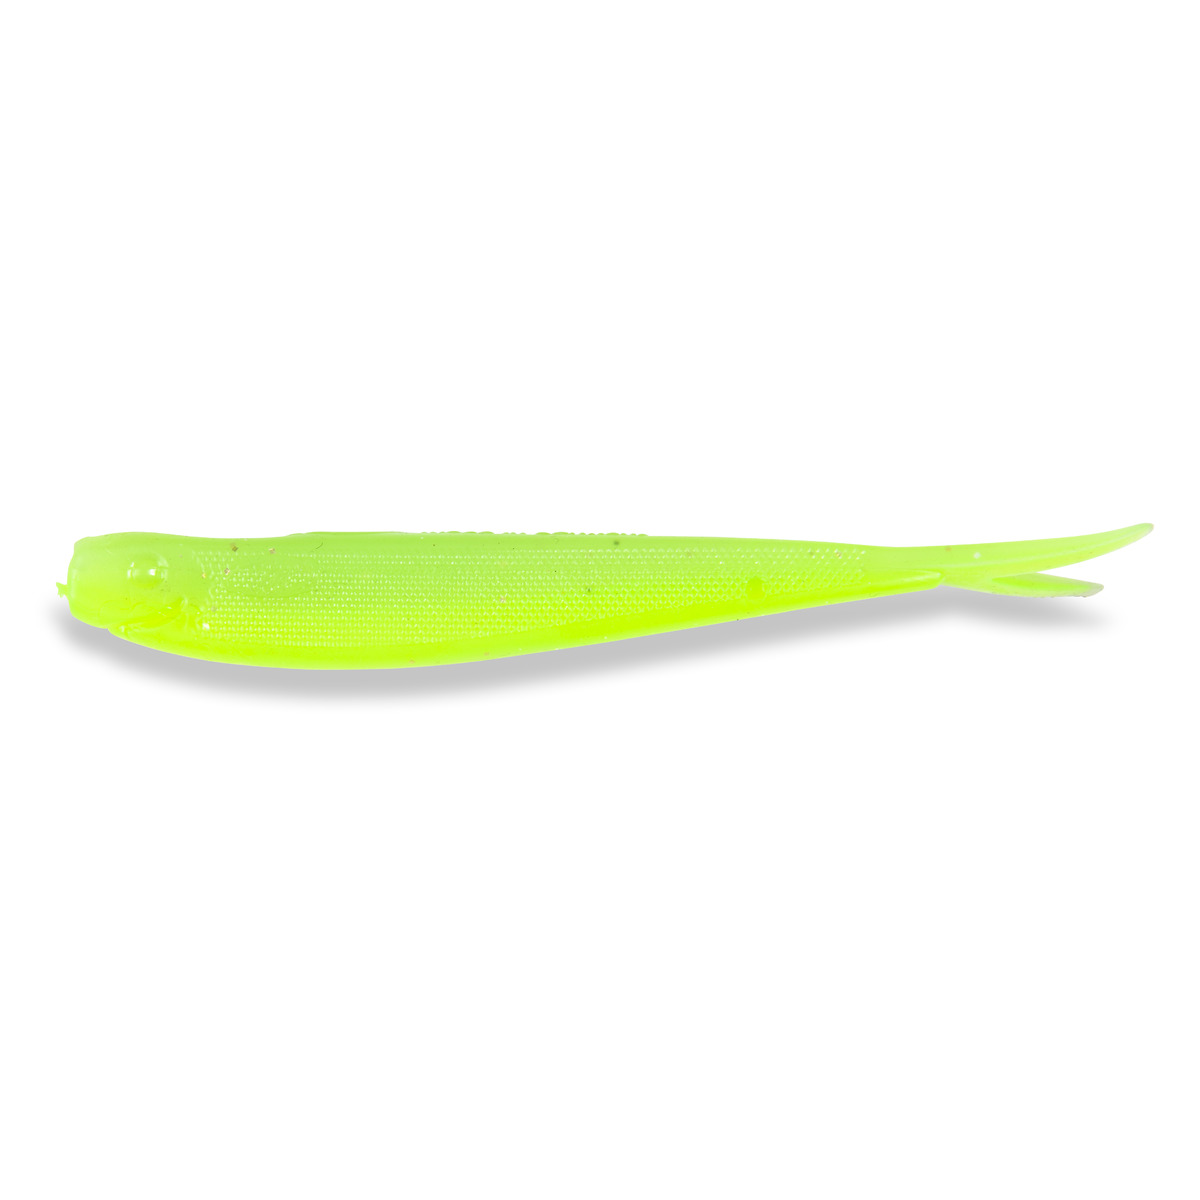 Iron Claw Moby V-tail 19 Cm - 20 FYC UV